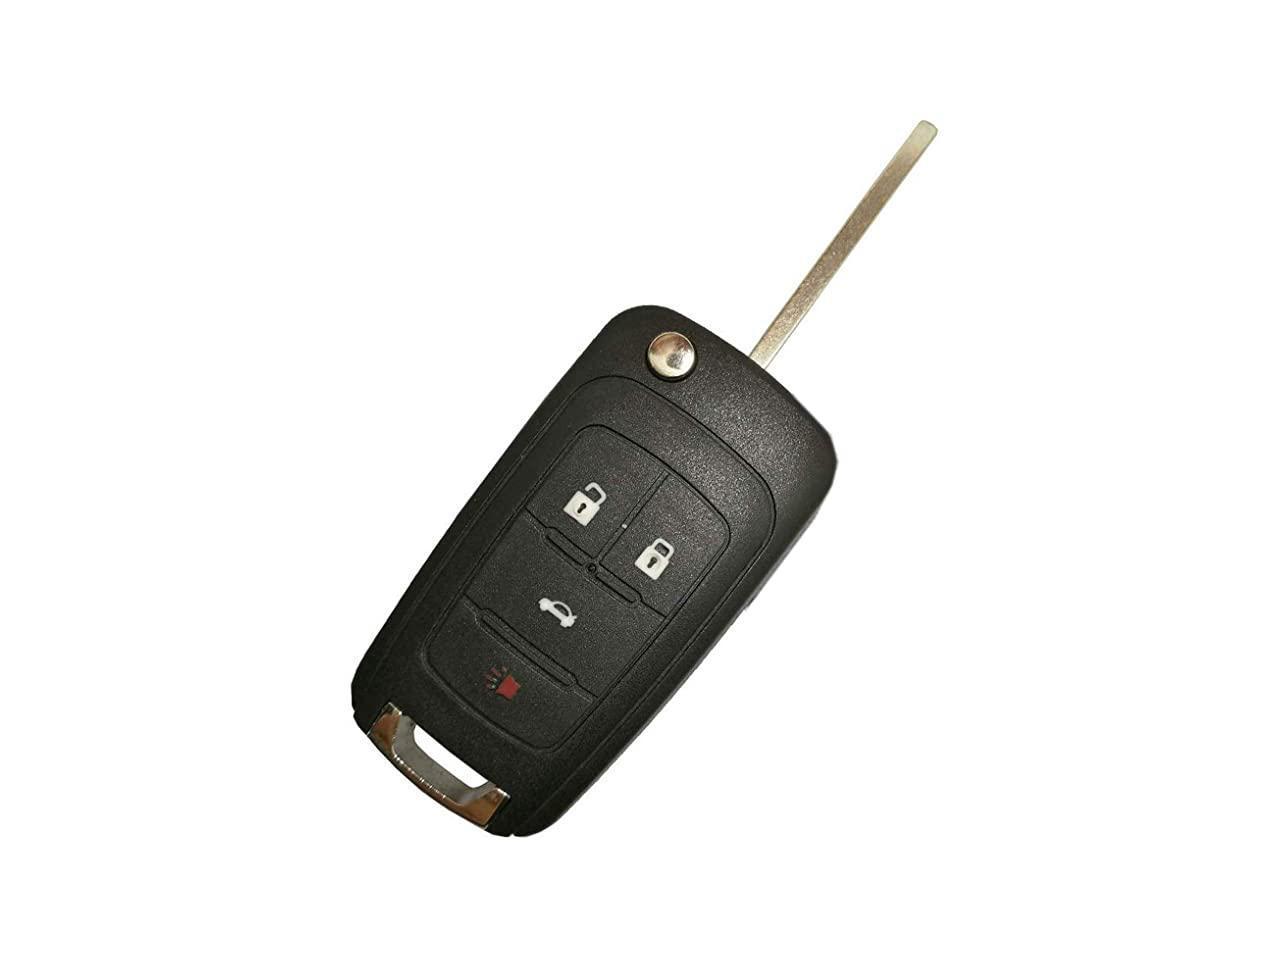 WBOY Keyless Flip Folding Remote Key Fob Case Shell 4 Buttons Replacement Compatible with 2010-2014 Chevrolet Camaro Equinox 